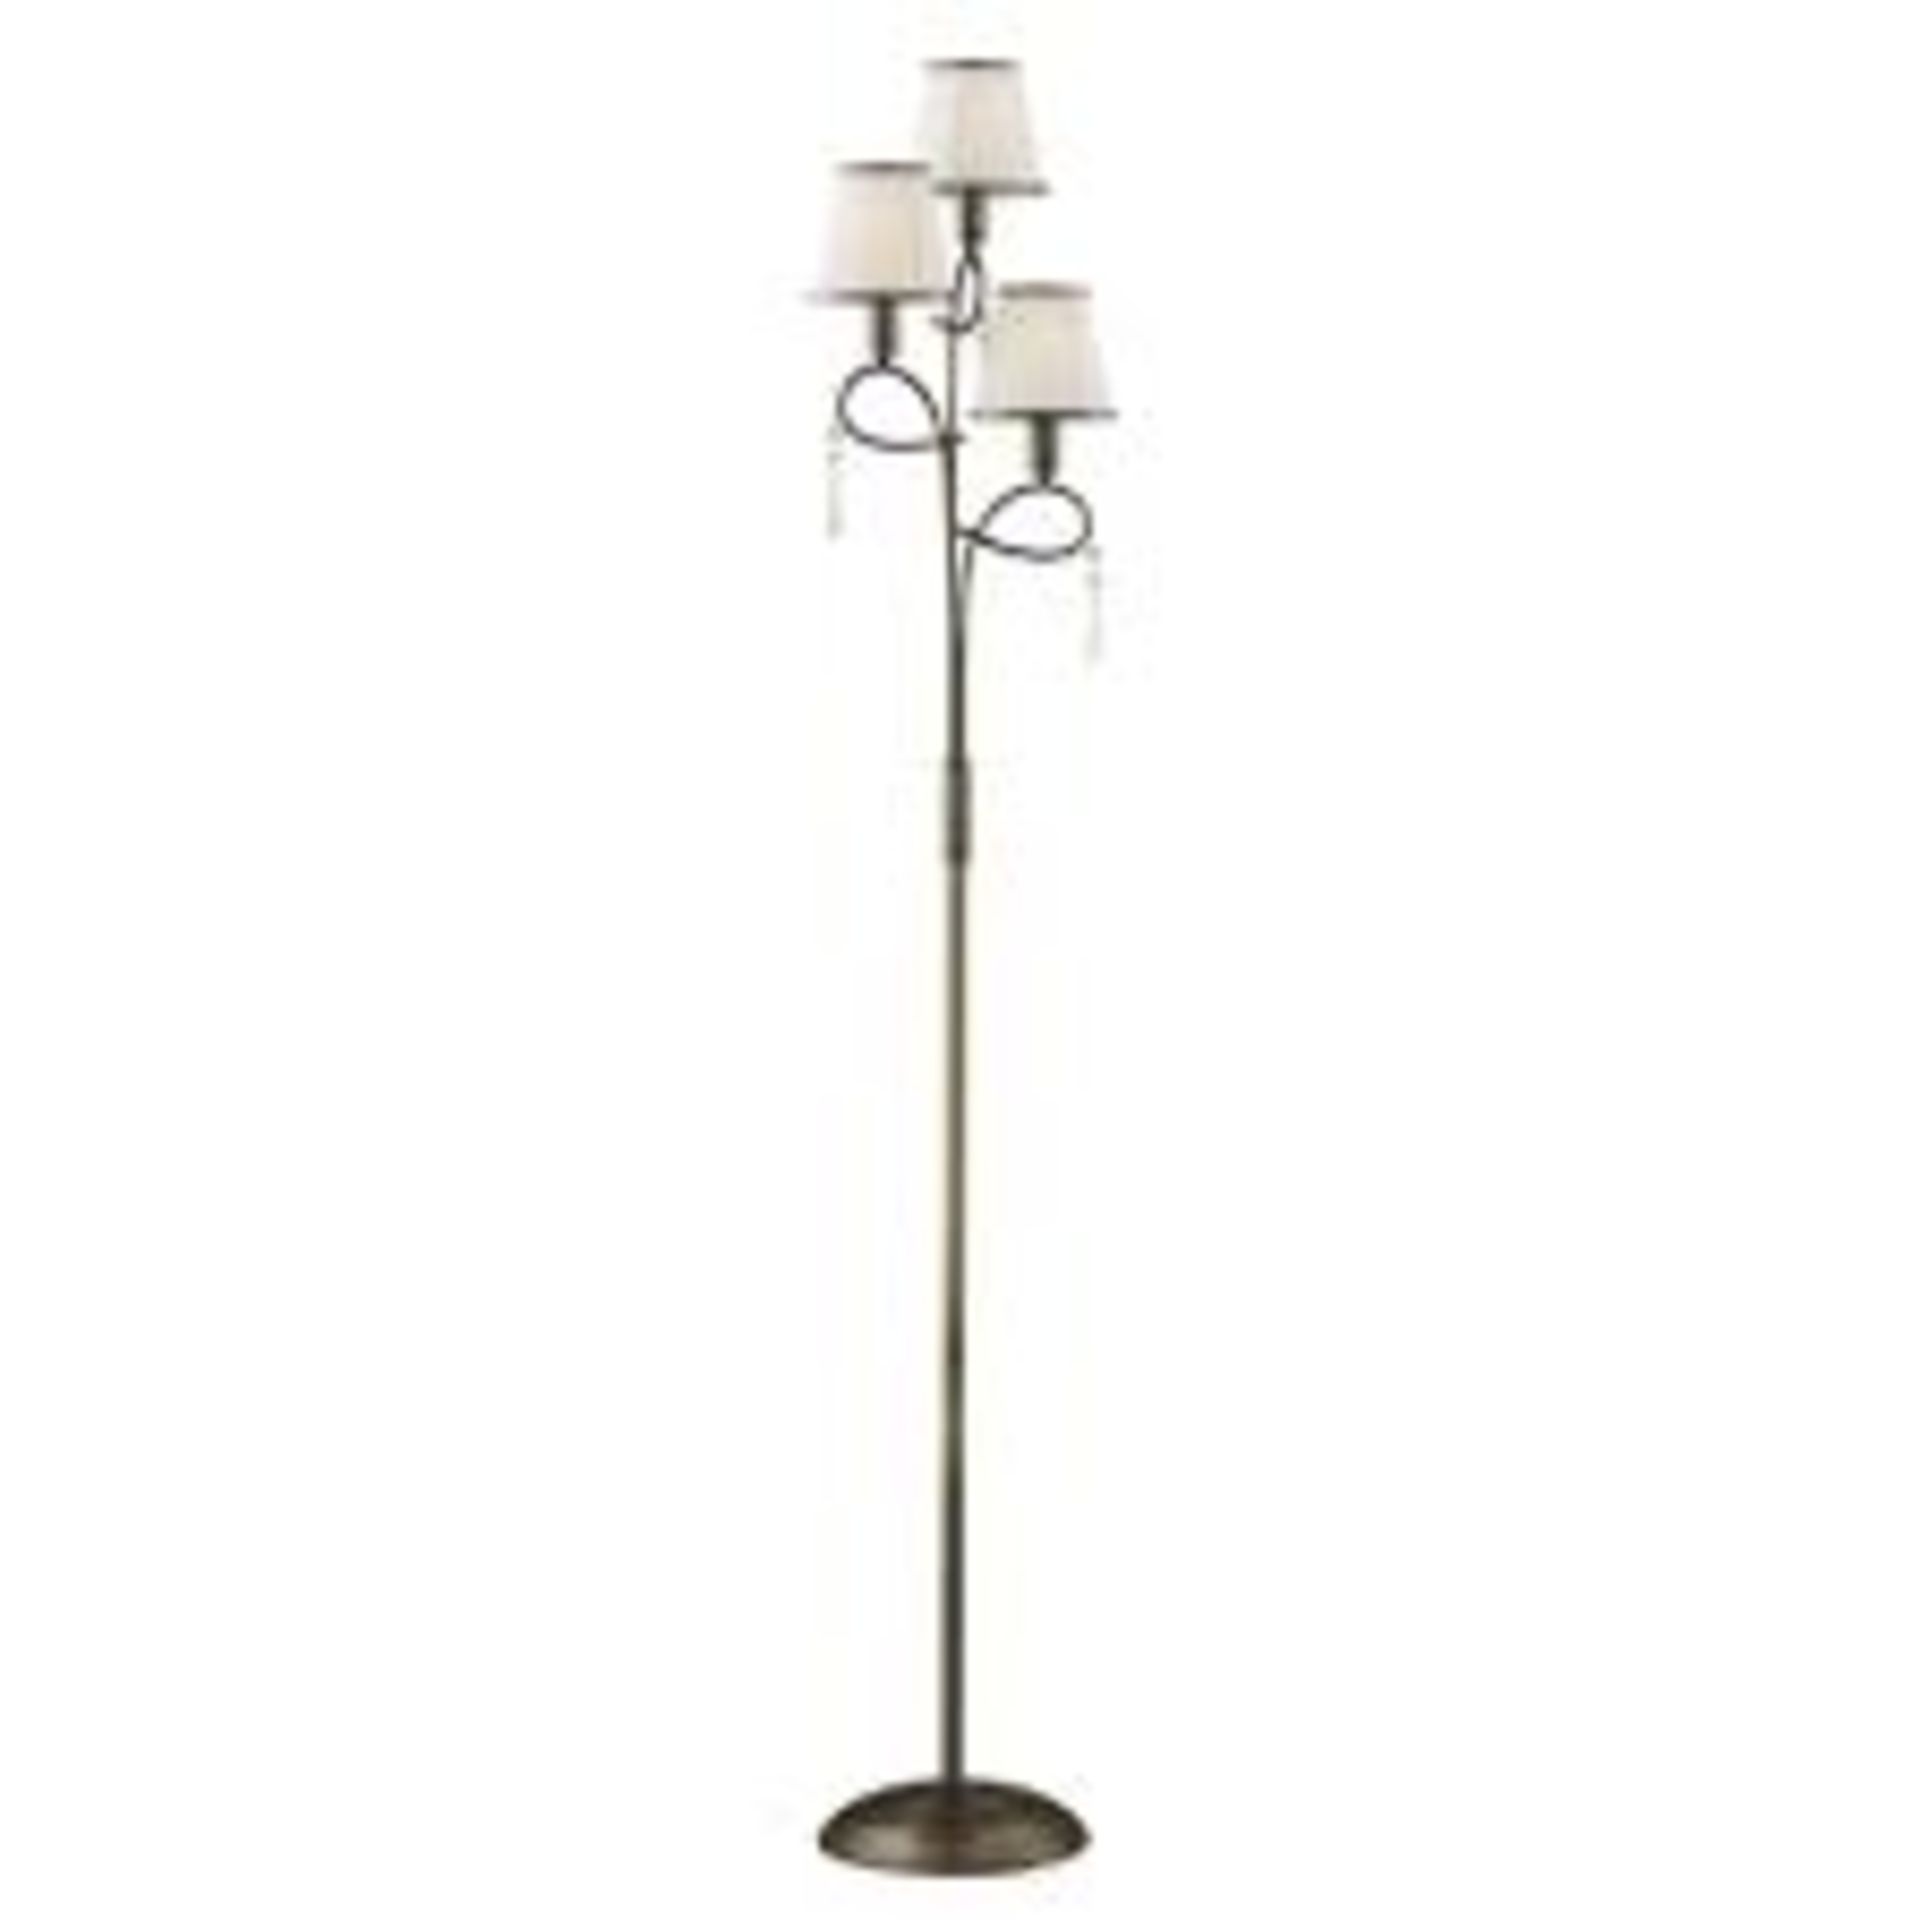 1 x Searchlight Simplicity Floor Lamp in Antique Brass - Ref: 5033AB - New and Boxed - RRP: £155.00 - Image 3 of 4